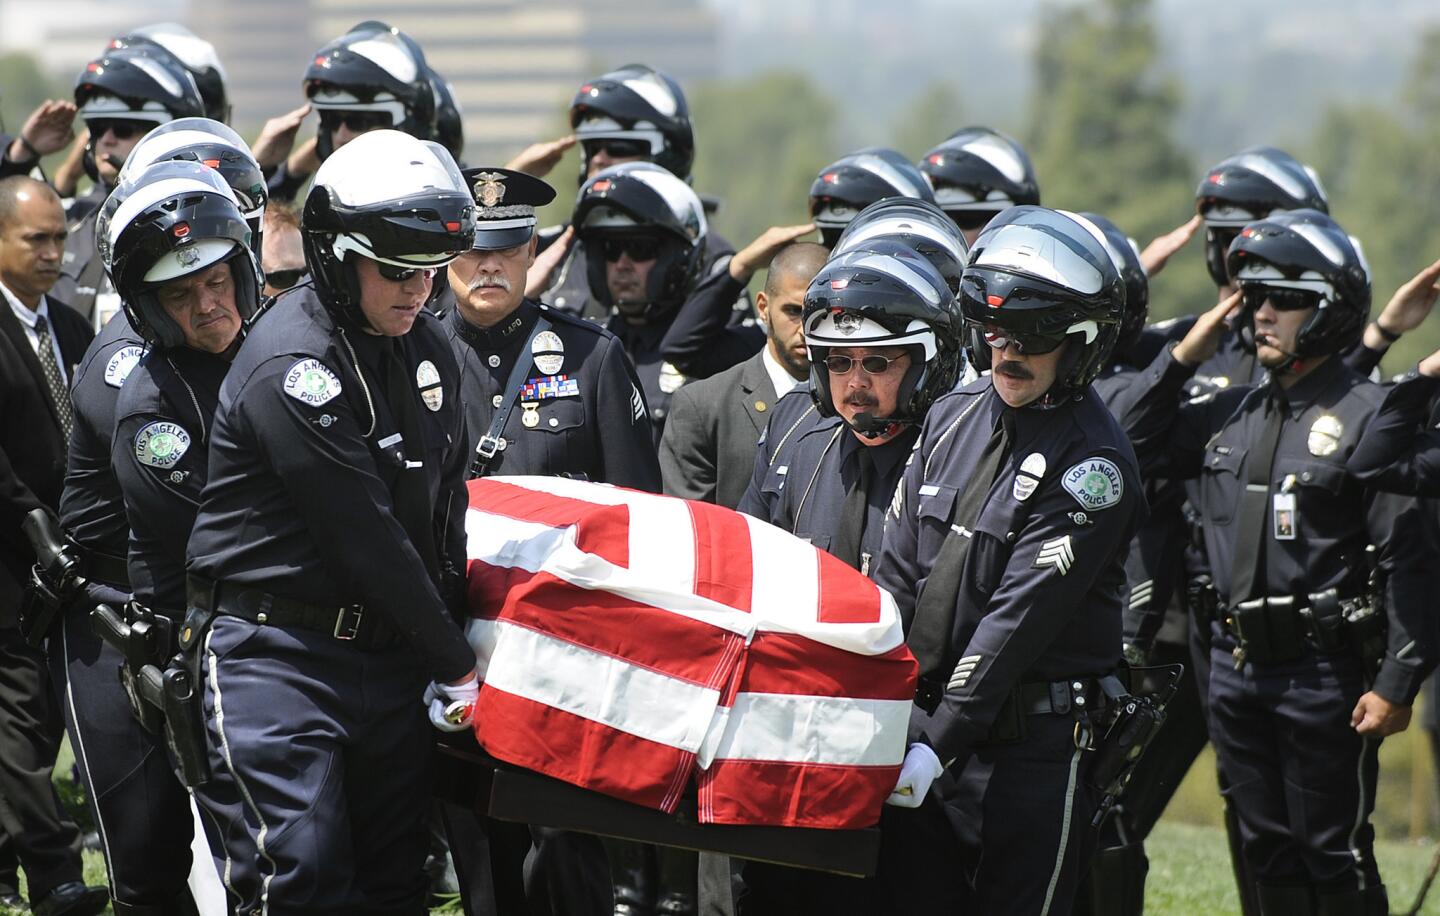 LAPD pallbearers carry the casket of fellow officer Chris Cortijo during burial services at Forest Lawn Hollywood Hills.